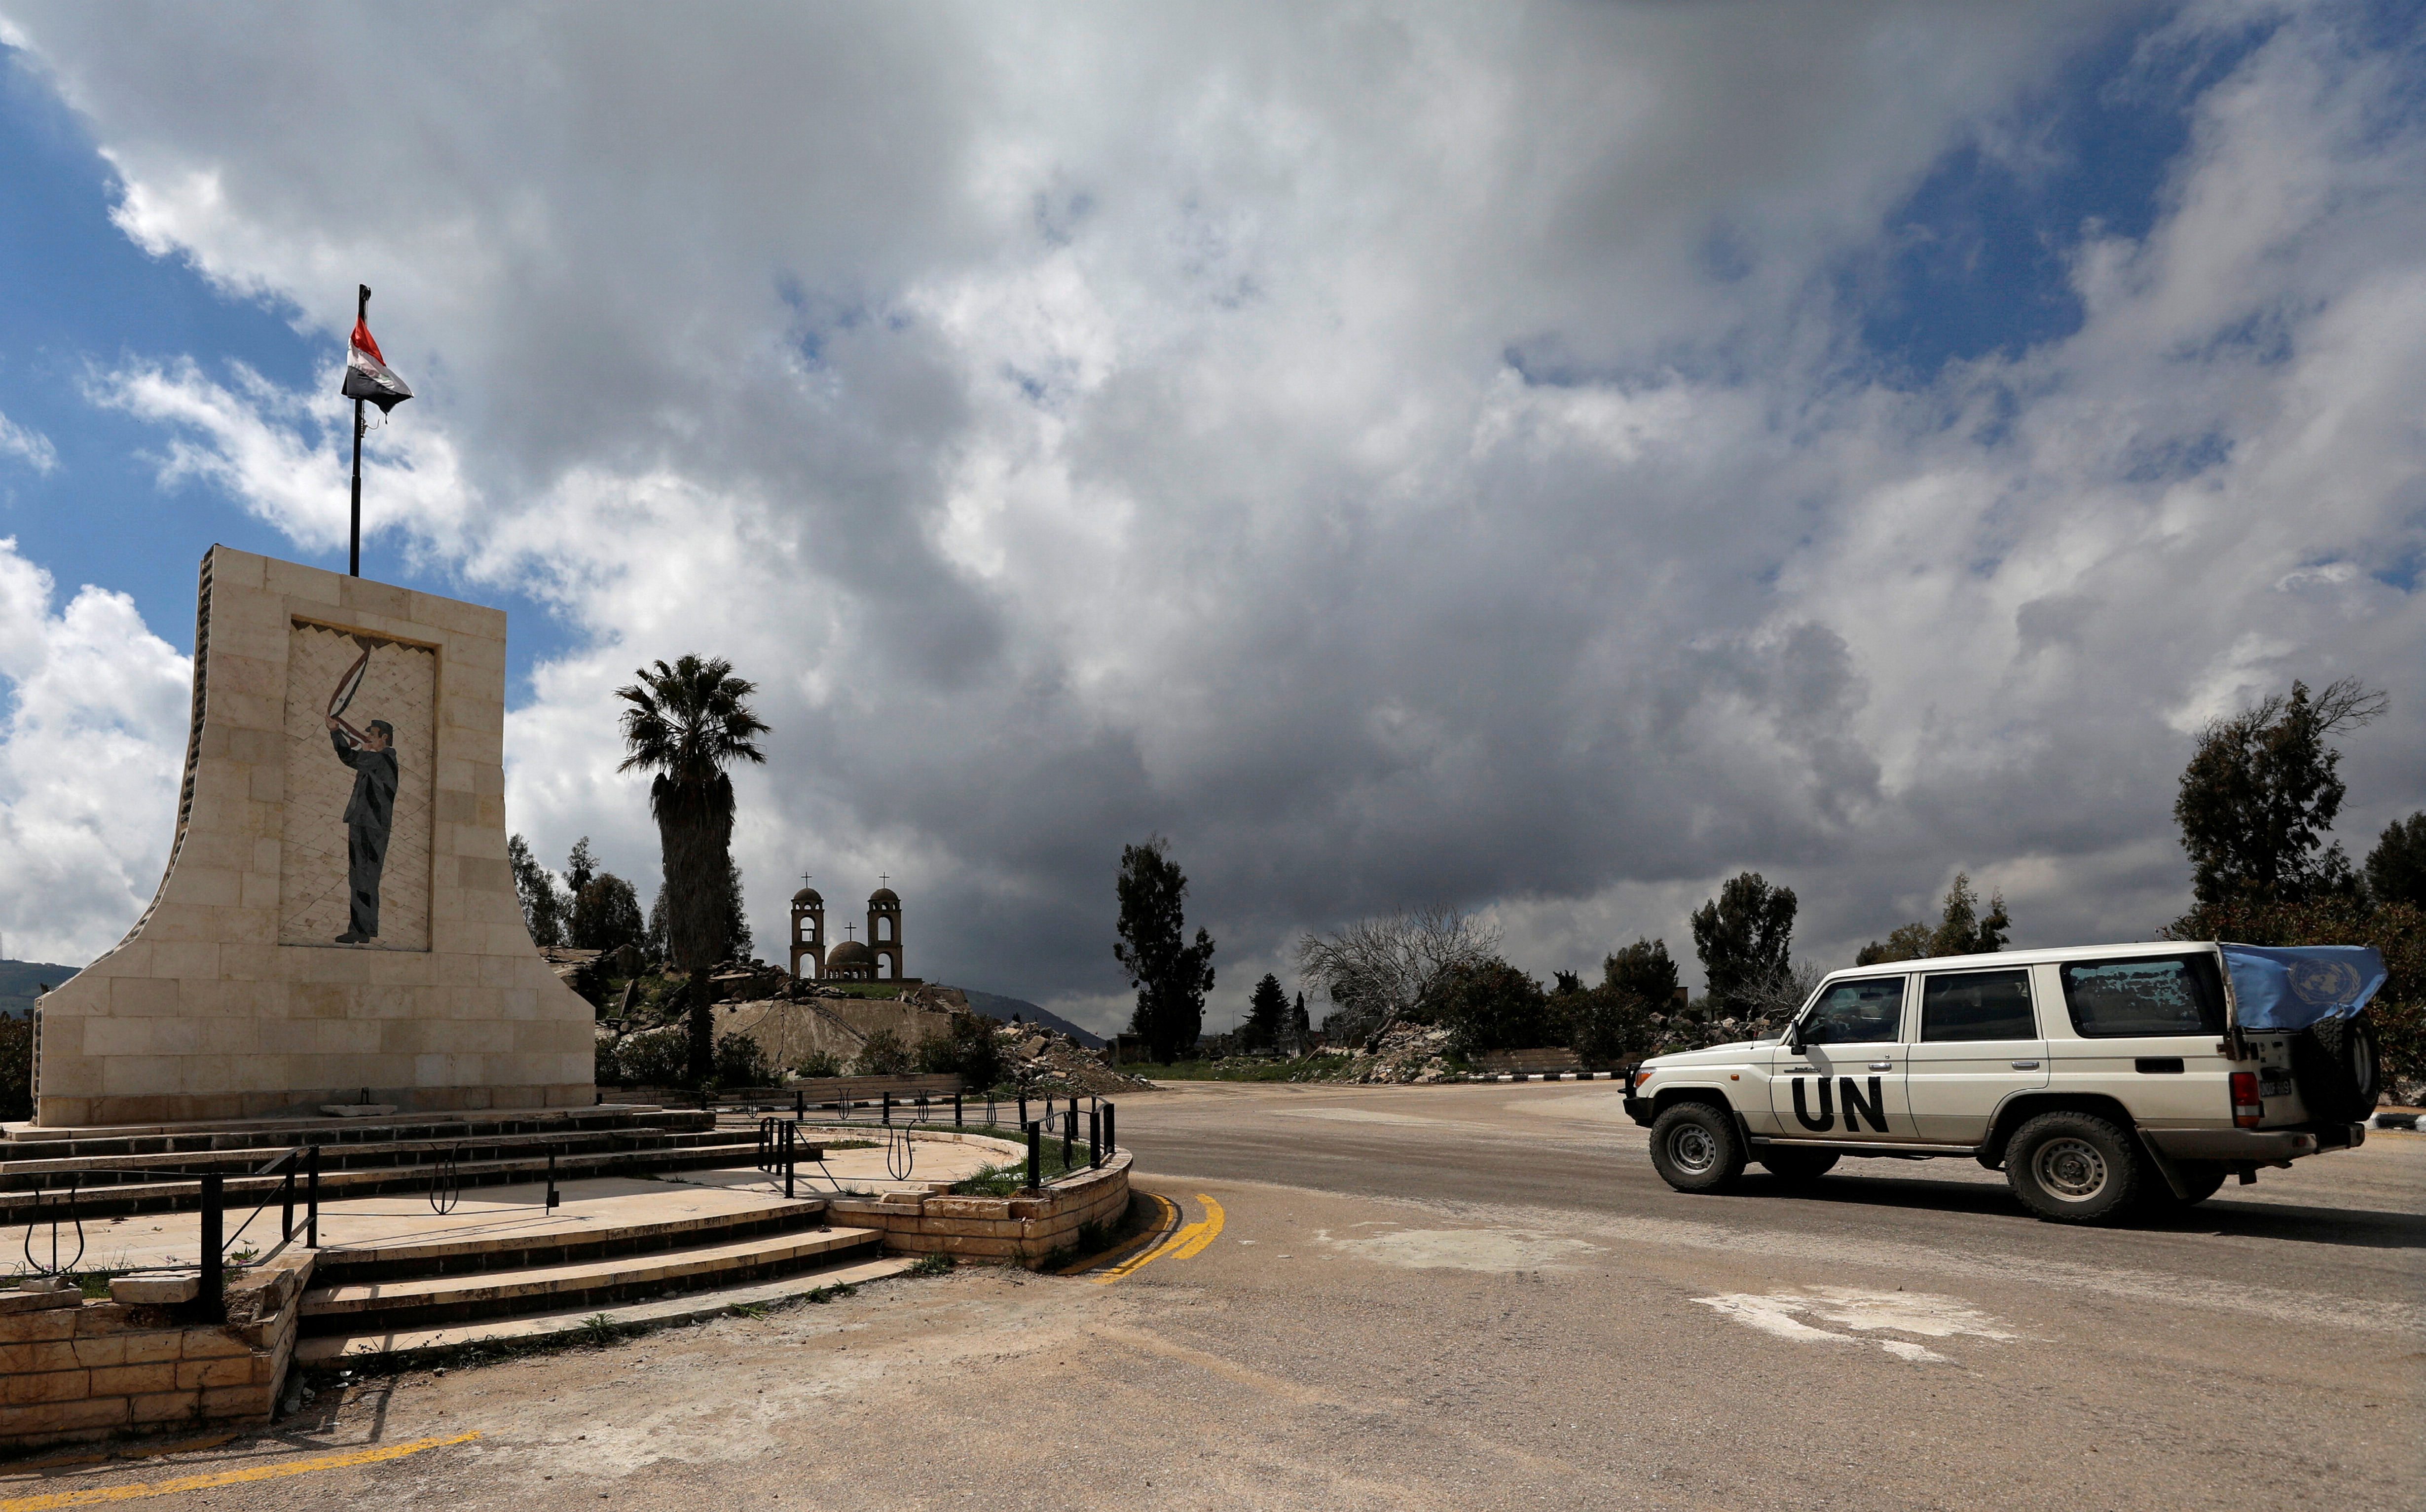 A U.N vehicle drives in Quneitra, near the Israeli-occupied Golan Heights